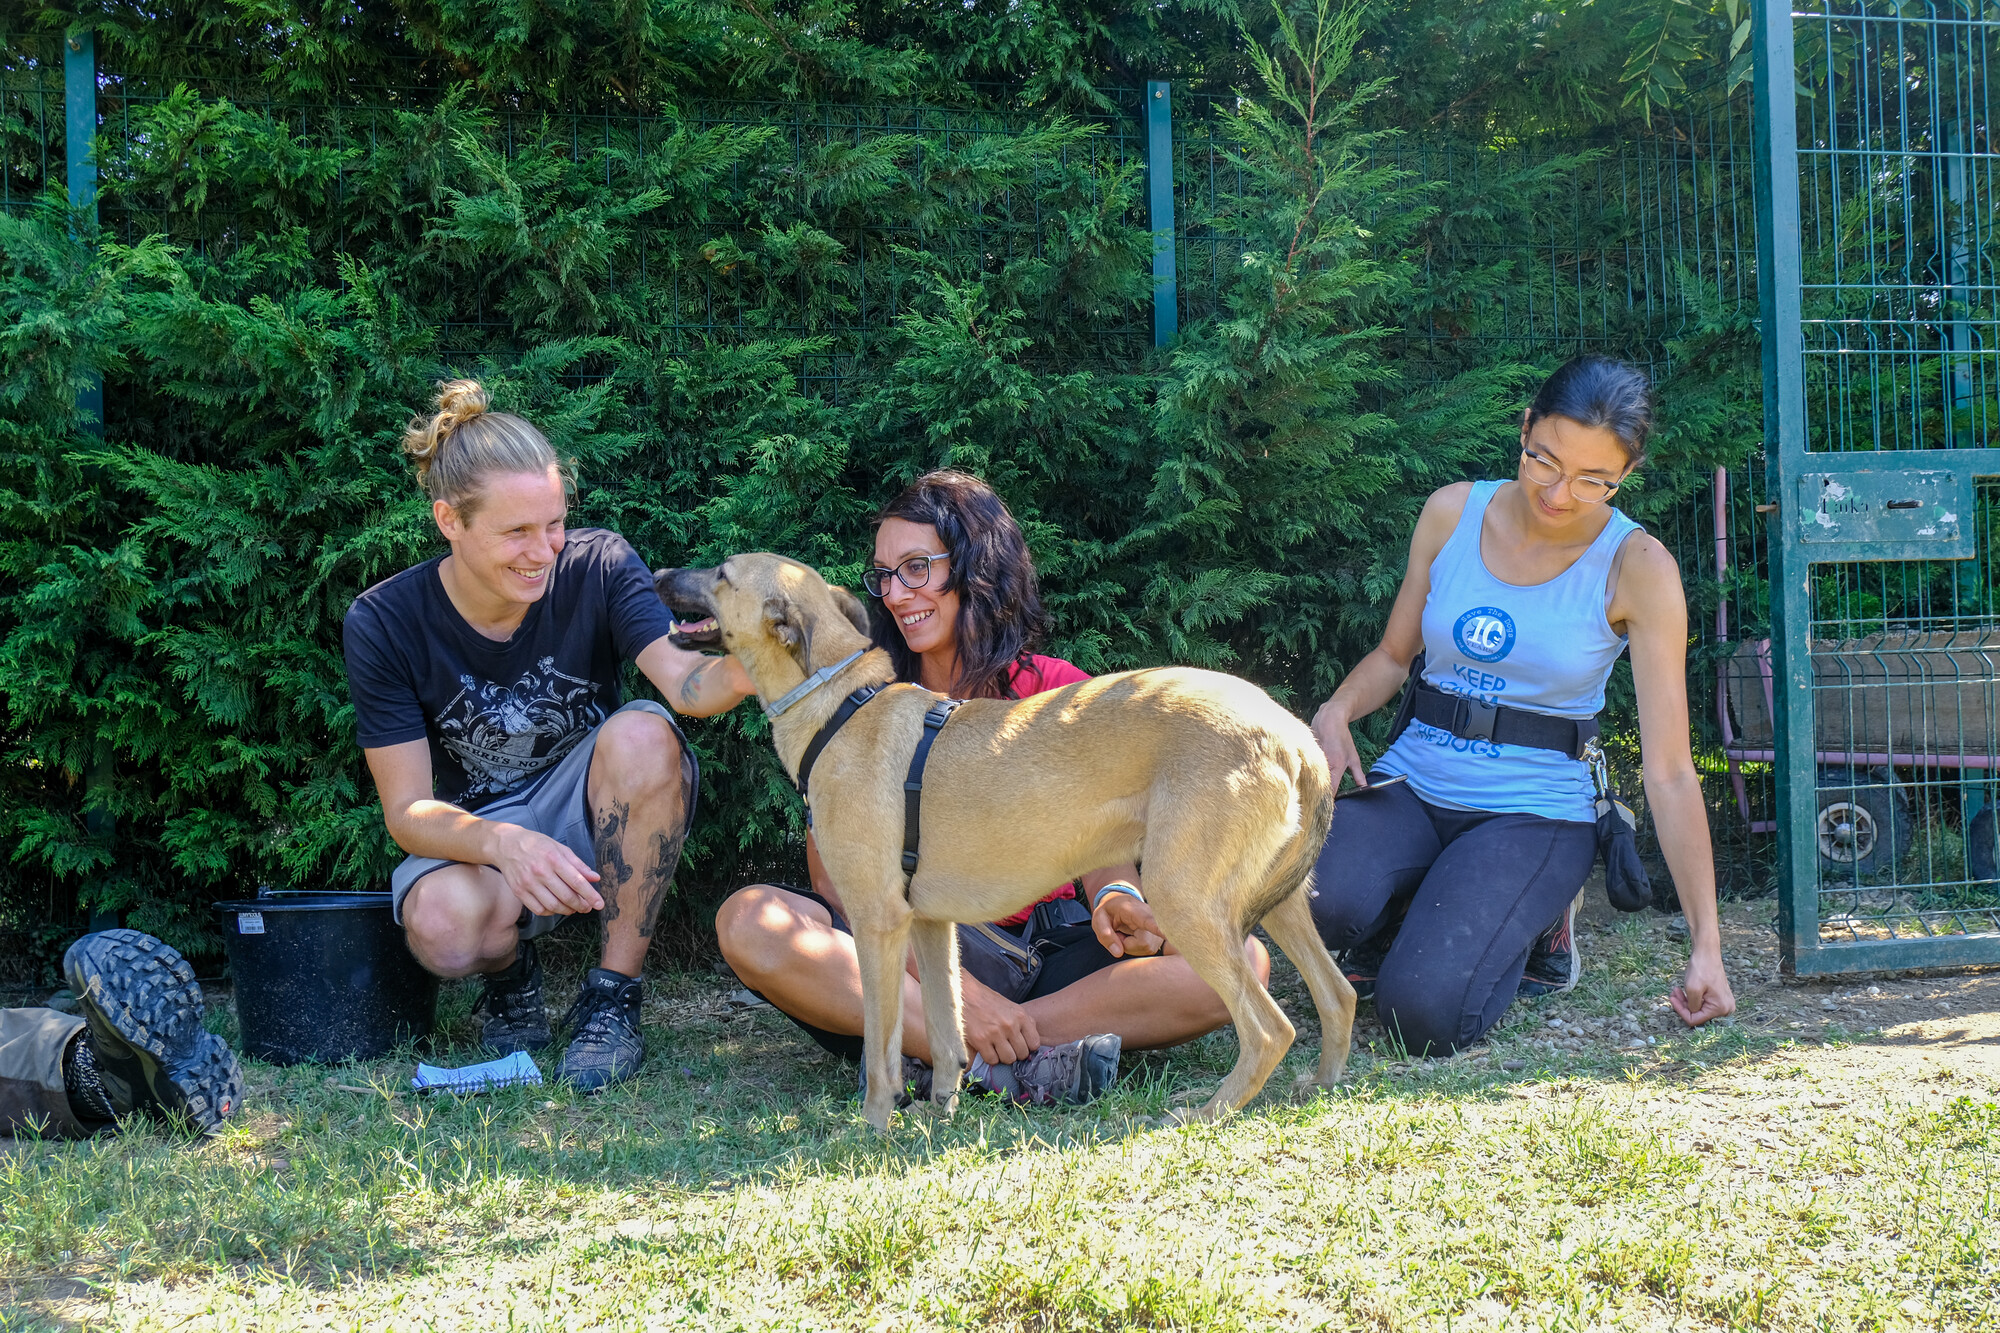 Tan-colour dog Giorgio enjoying some fuss from three members of the Save the Dogs team in the garden